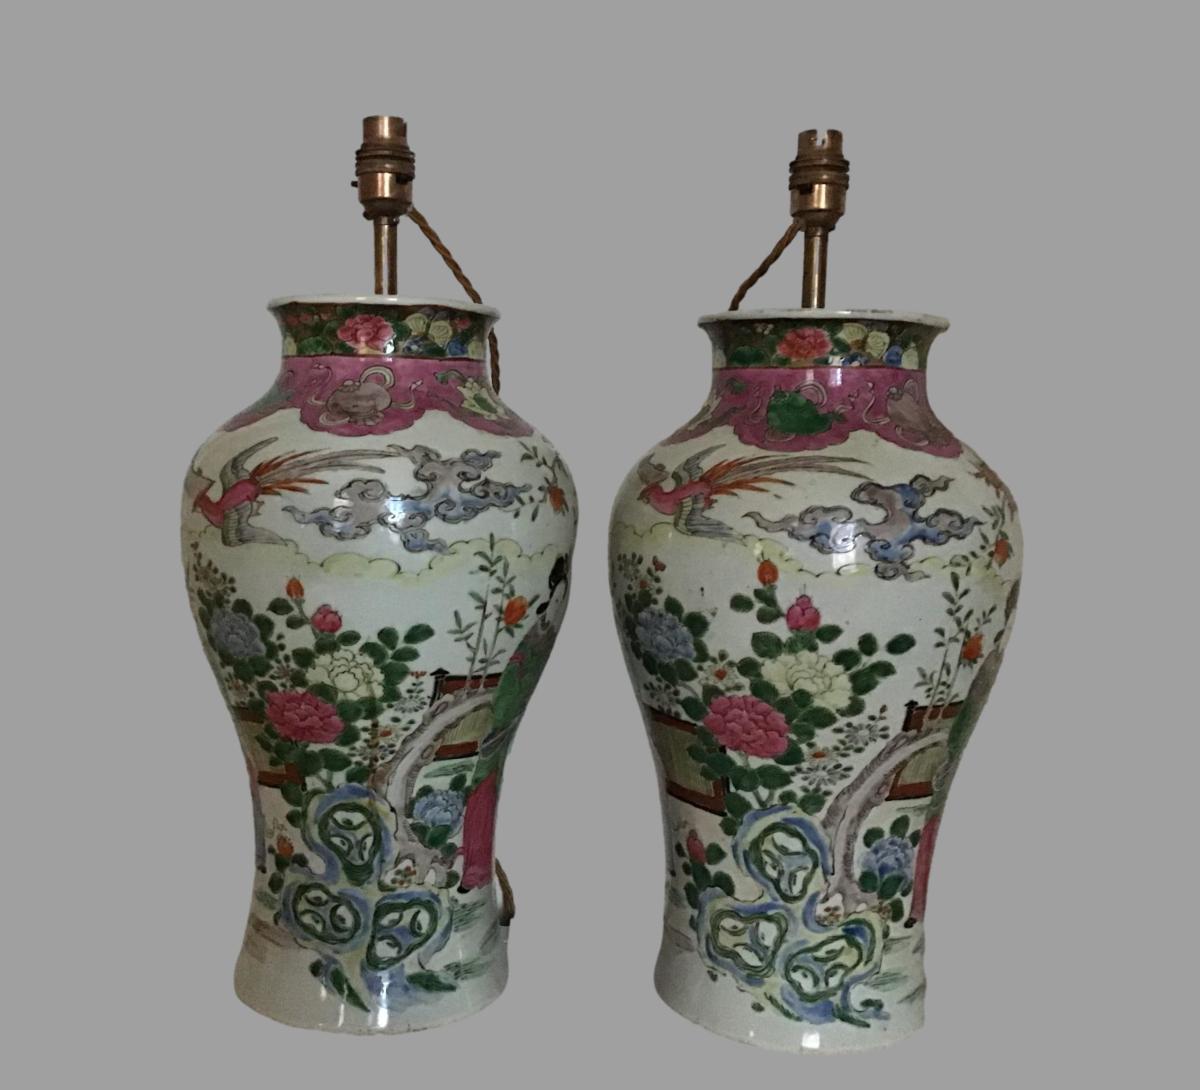 A pair of highly decorative late 19th century Japanese vases